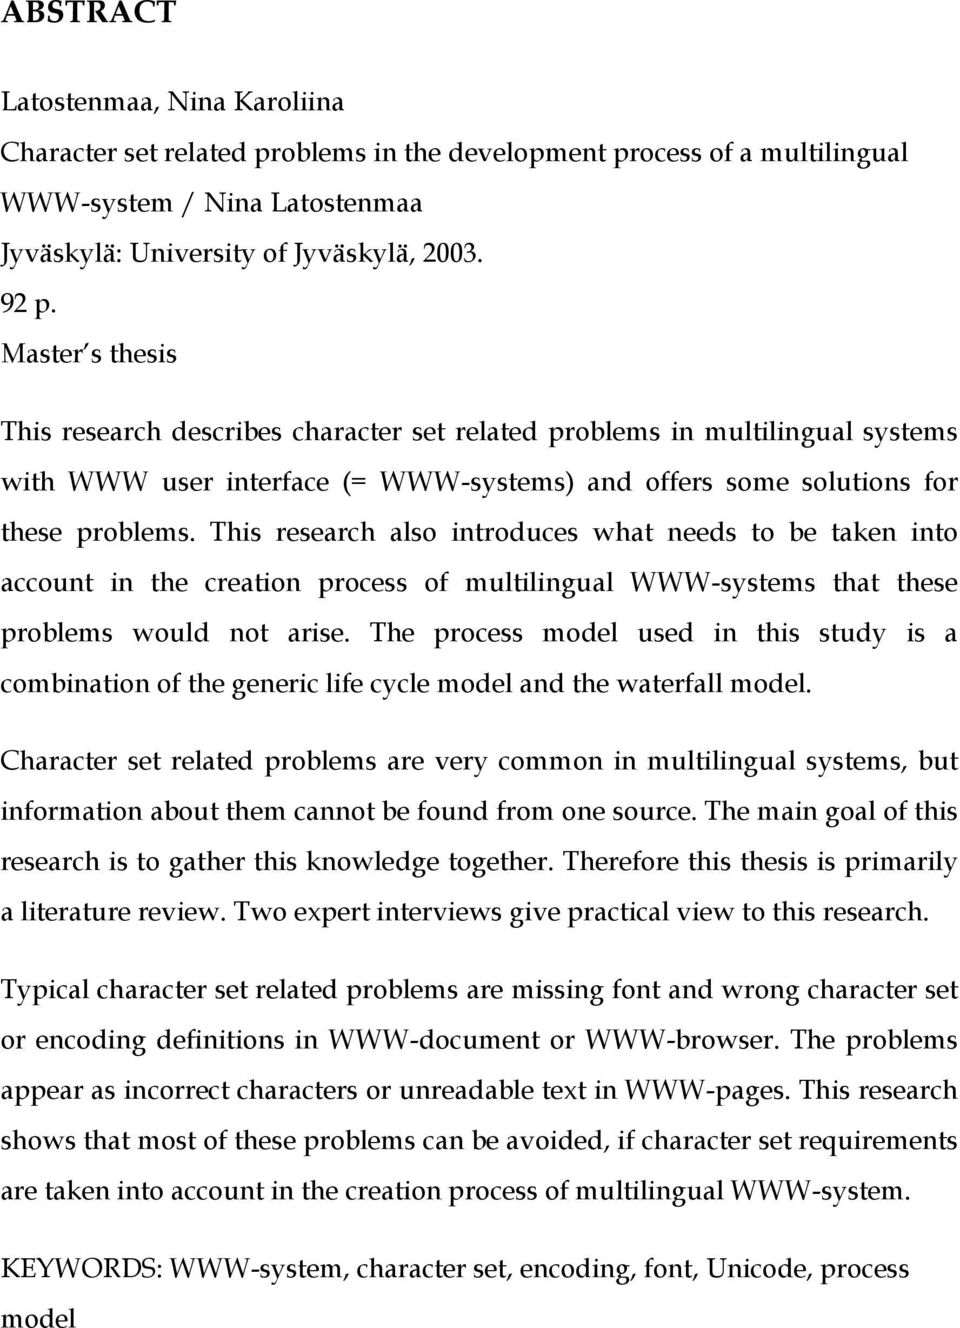 This research also introduces what needs to be taken into account in the creation process of multilingual WWW-systems that these problems would not arise.